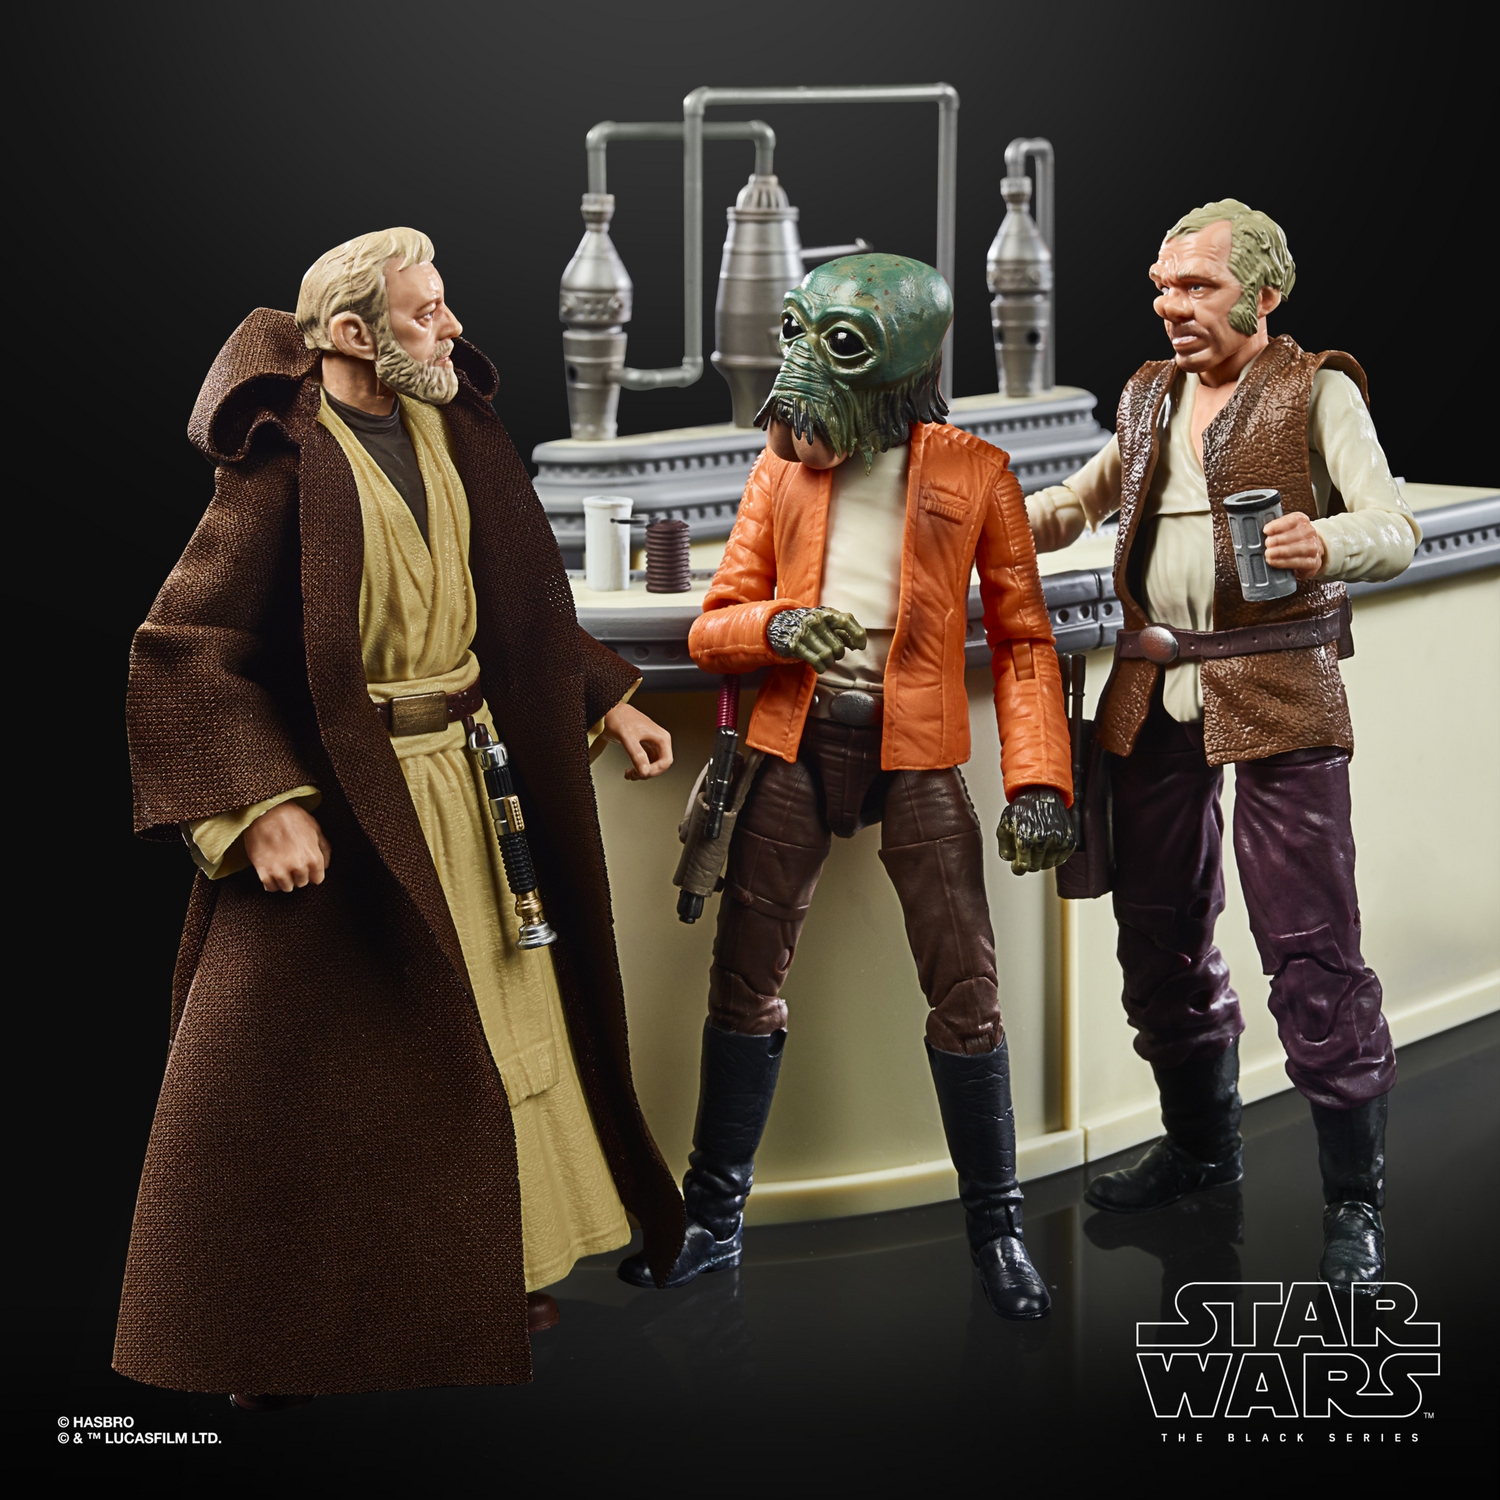 STAR WARS THE BLACK SERIES THE POWER OF THE FORCE CANTINA SHOWDOWN Playset - oop (13).jpg